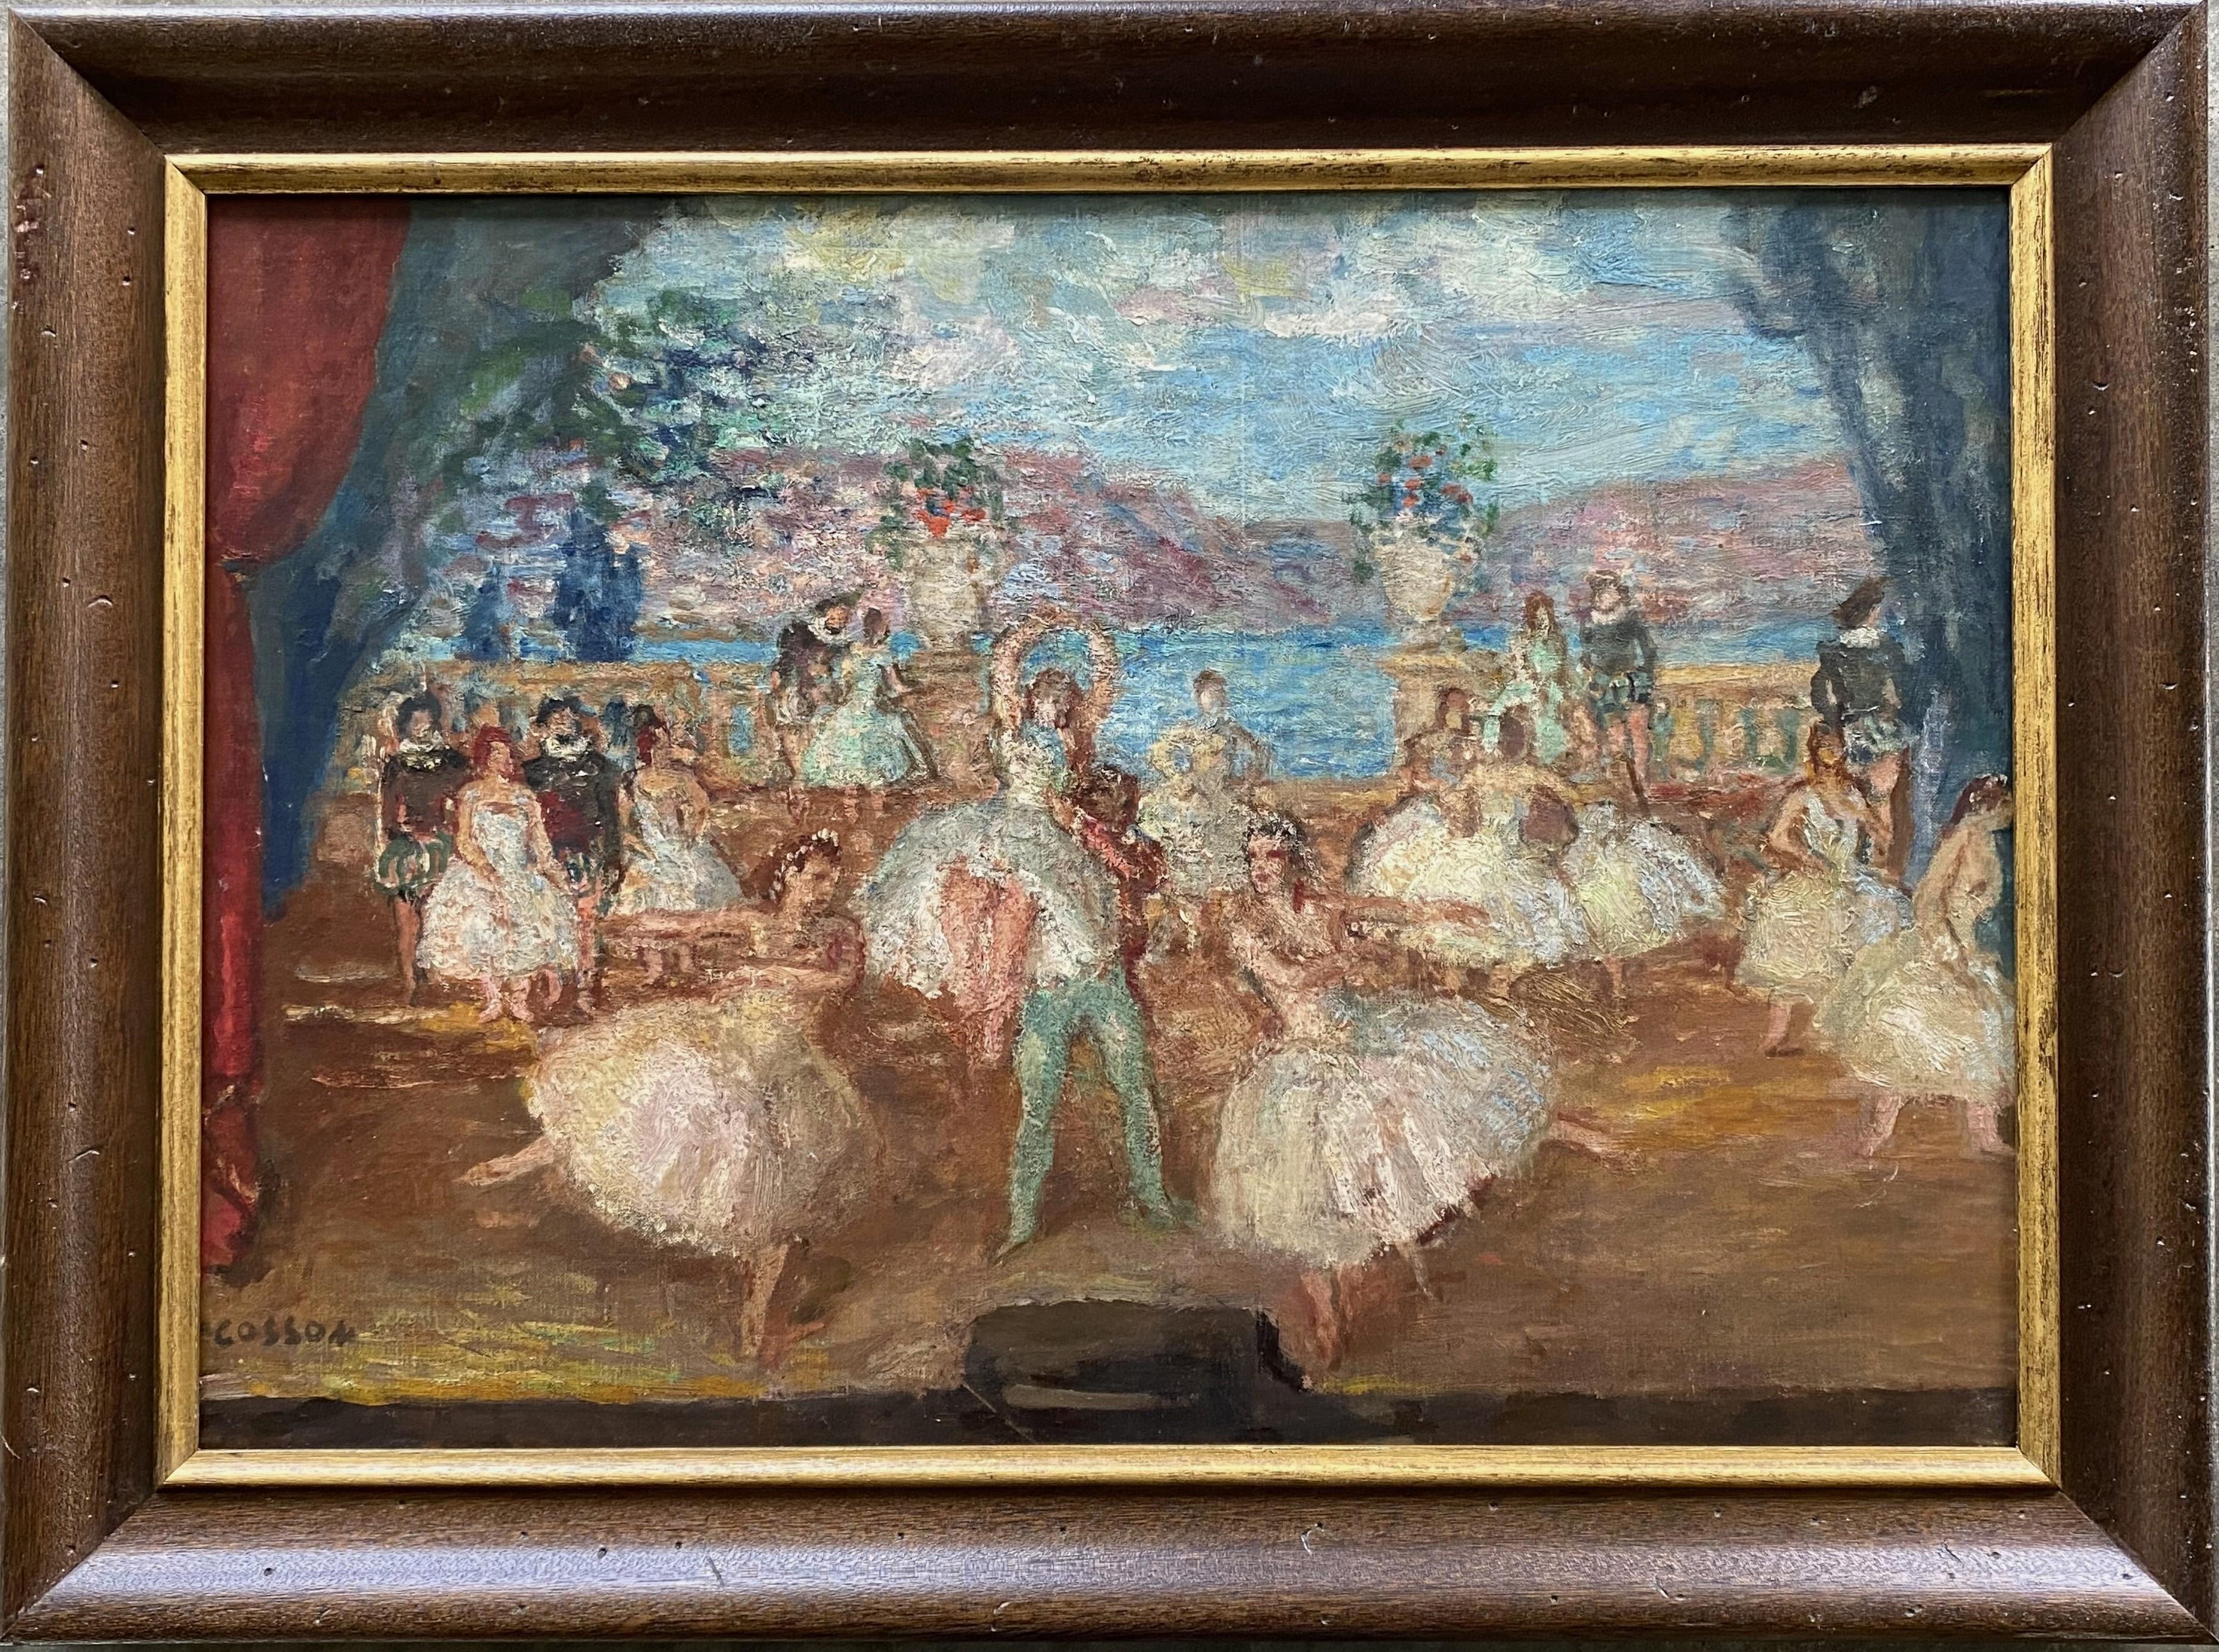 Ballerinas on Stage - Painting by Jean-Louis-Marcel Cosson